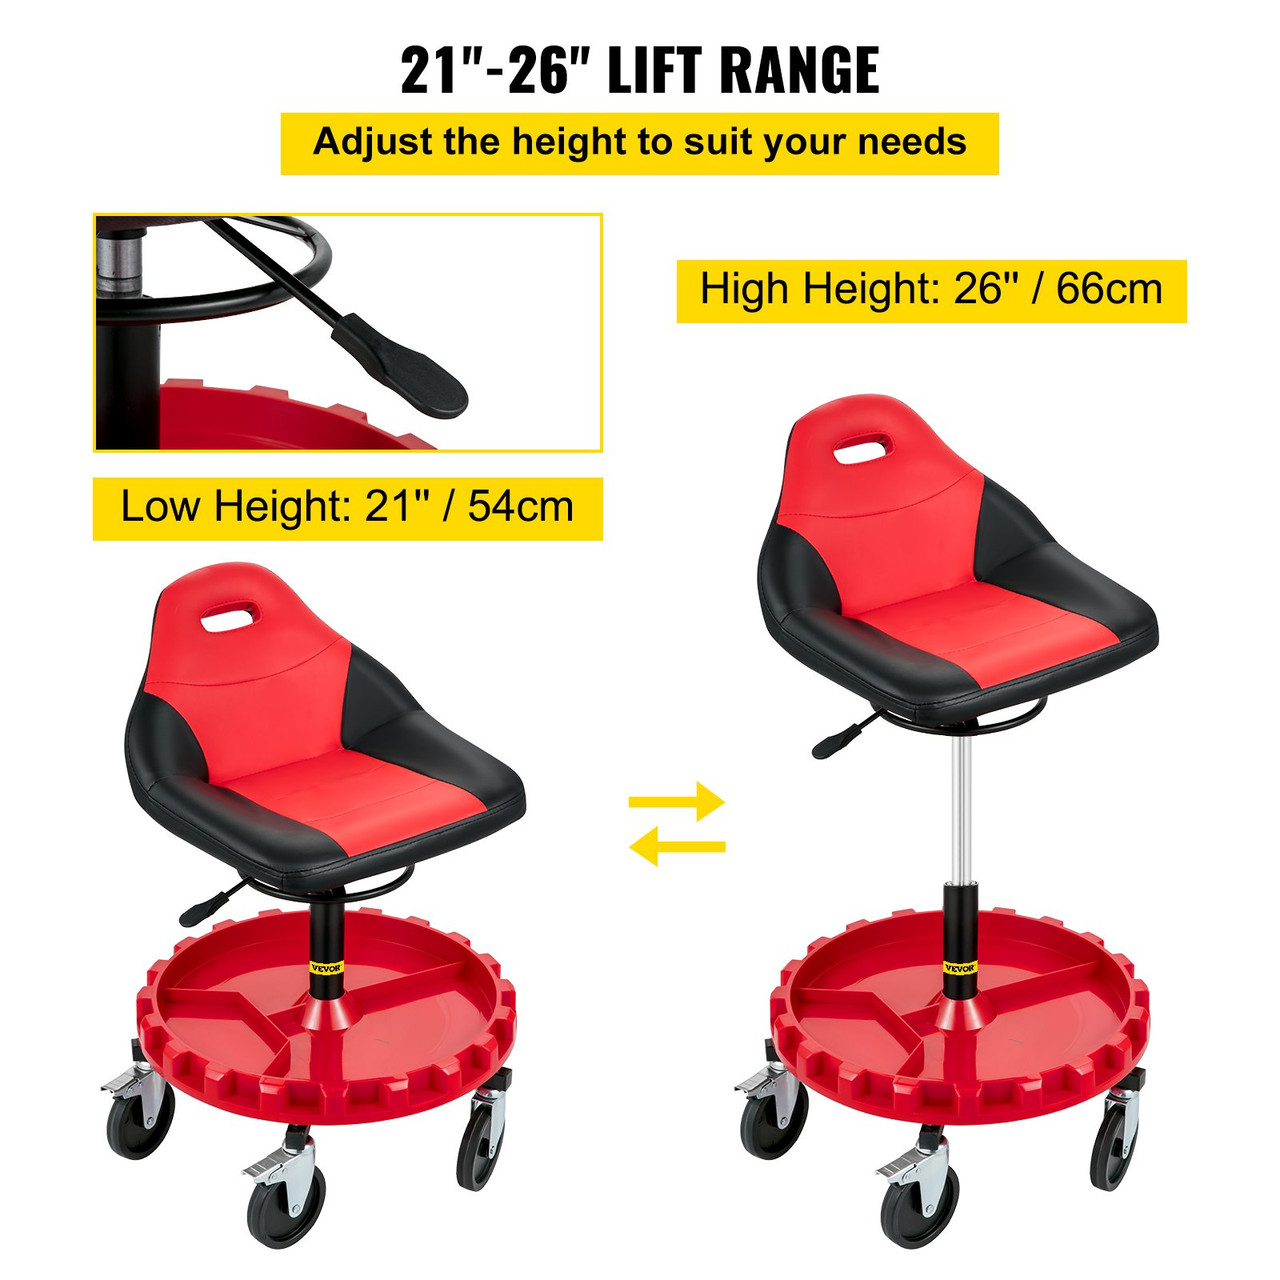 Rolling Garage Stool, 300LBS Capacity, 21"-26" Adjustable Height Range, Mechanic Seat with Swivel Casters and Tool Tray, for Workshop, Auto Repair Shop, Red